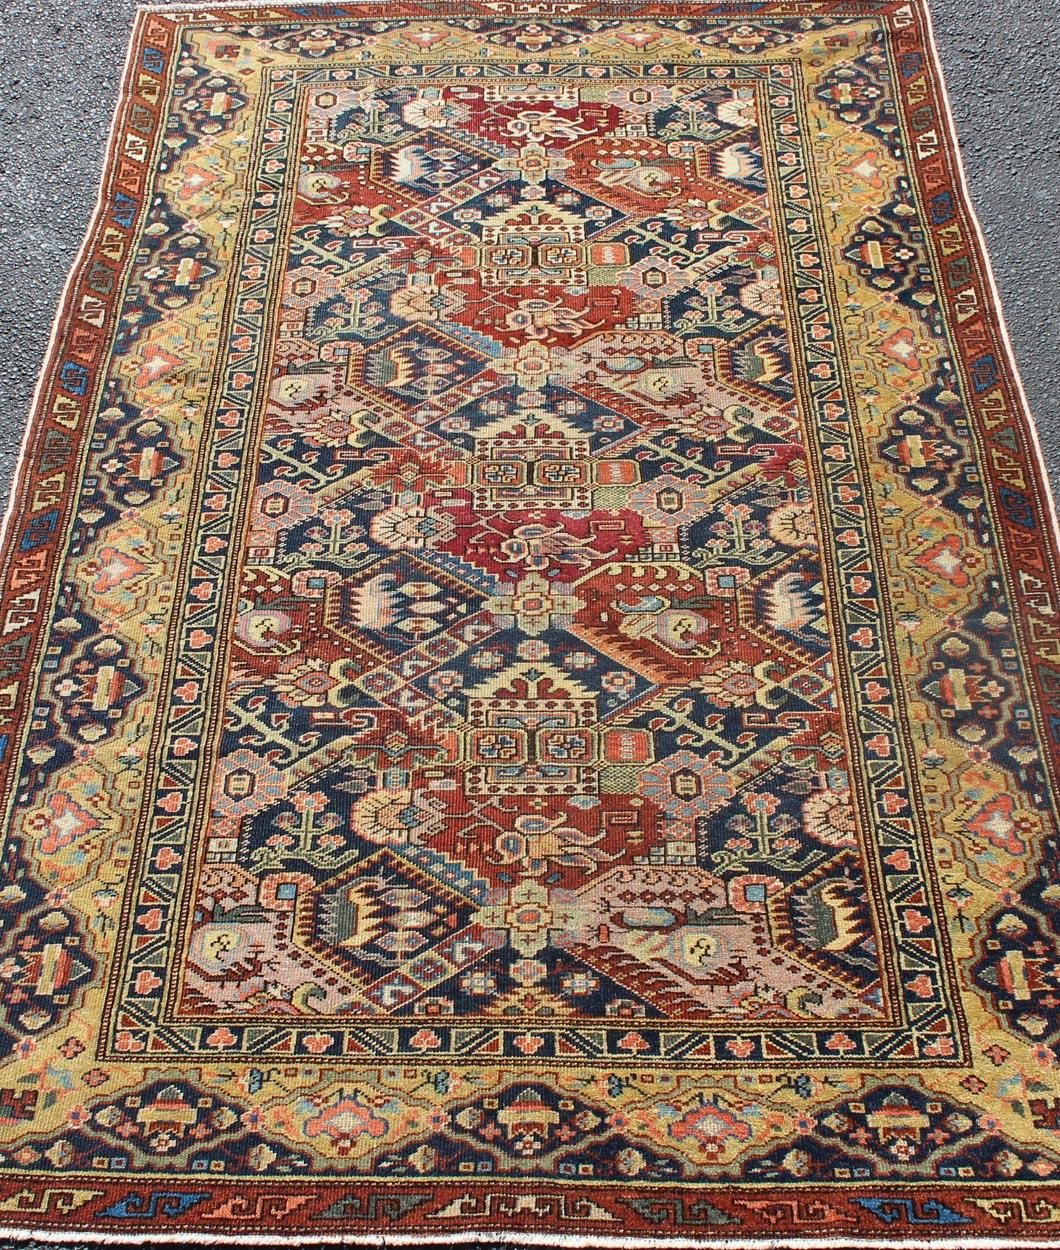 Kazak 19th Century Exquisite Antique Caucasian Seychour Rug In Red's And Blue's For Sale